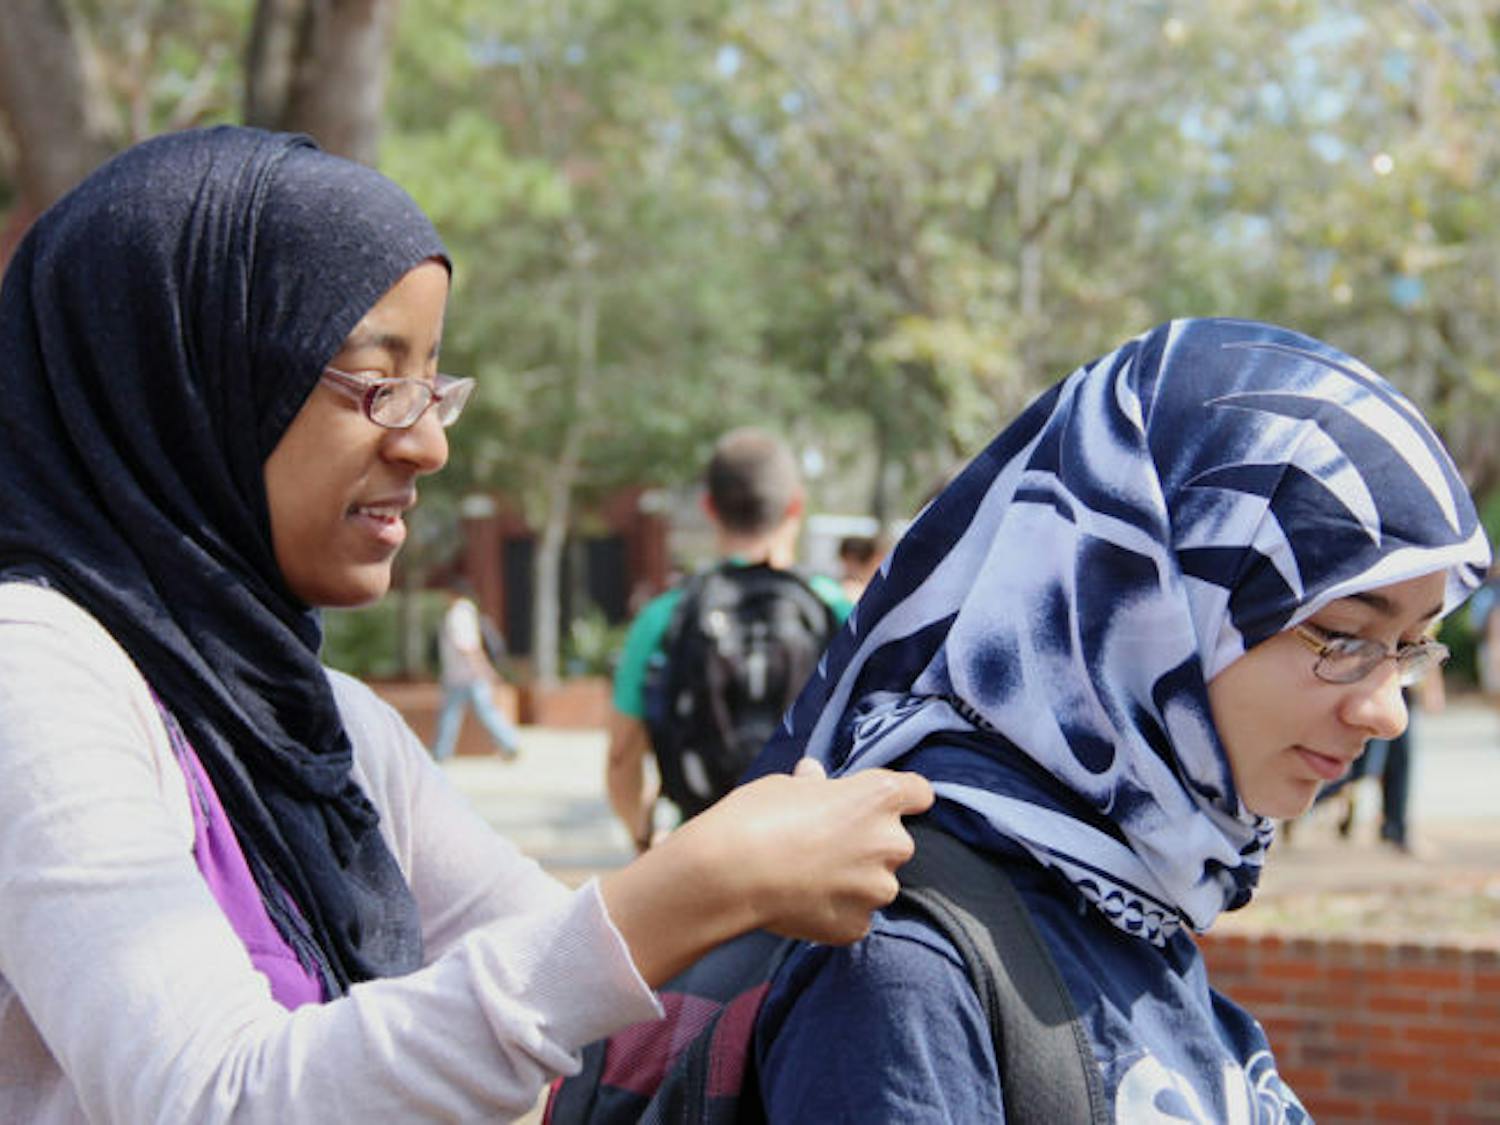 Heiba Belal, 21, left, a UF microbiology senior, helps Lisdelys Garcia, 19, a UF biomedical engineering freshman, put on her hijab, a veil that covers the head, on Turlington Plaza on Monday for Islam on Campus’ “Hijab for a Day.”